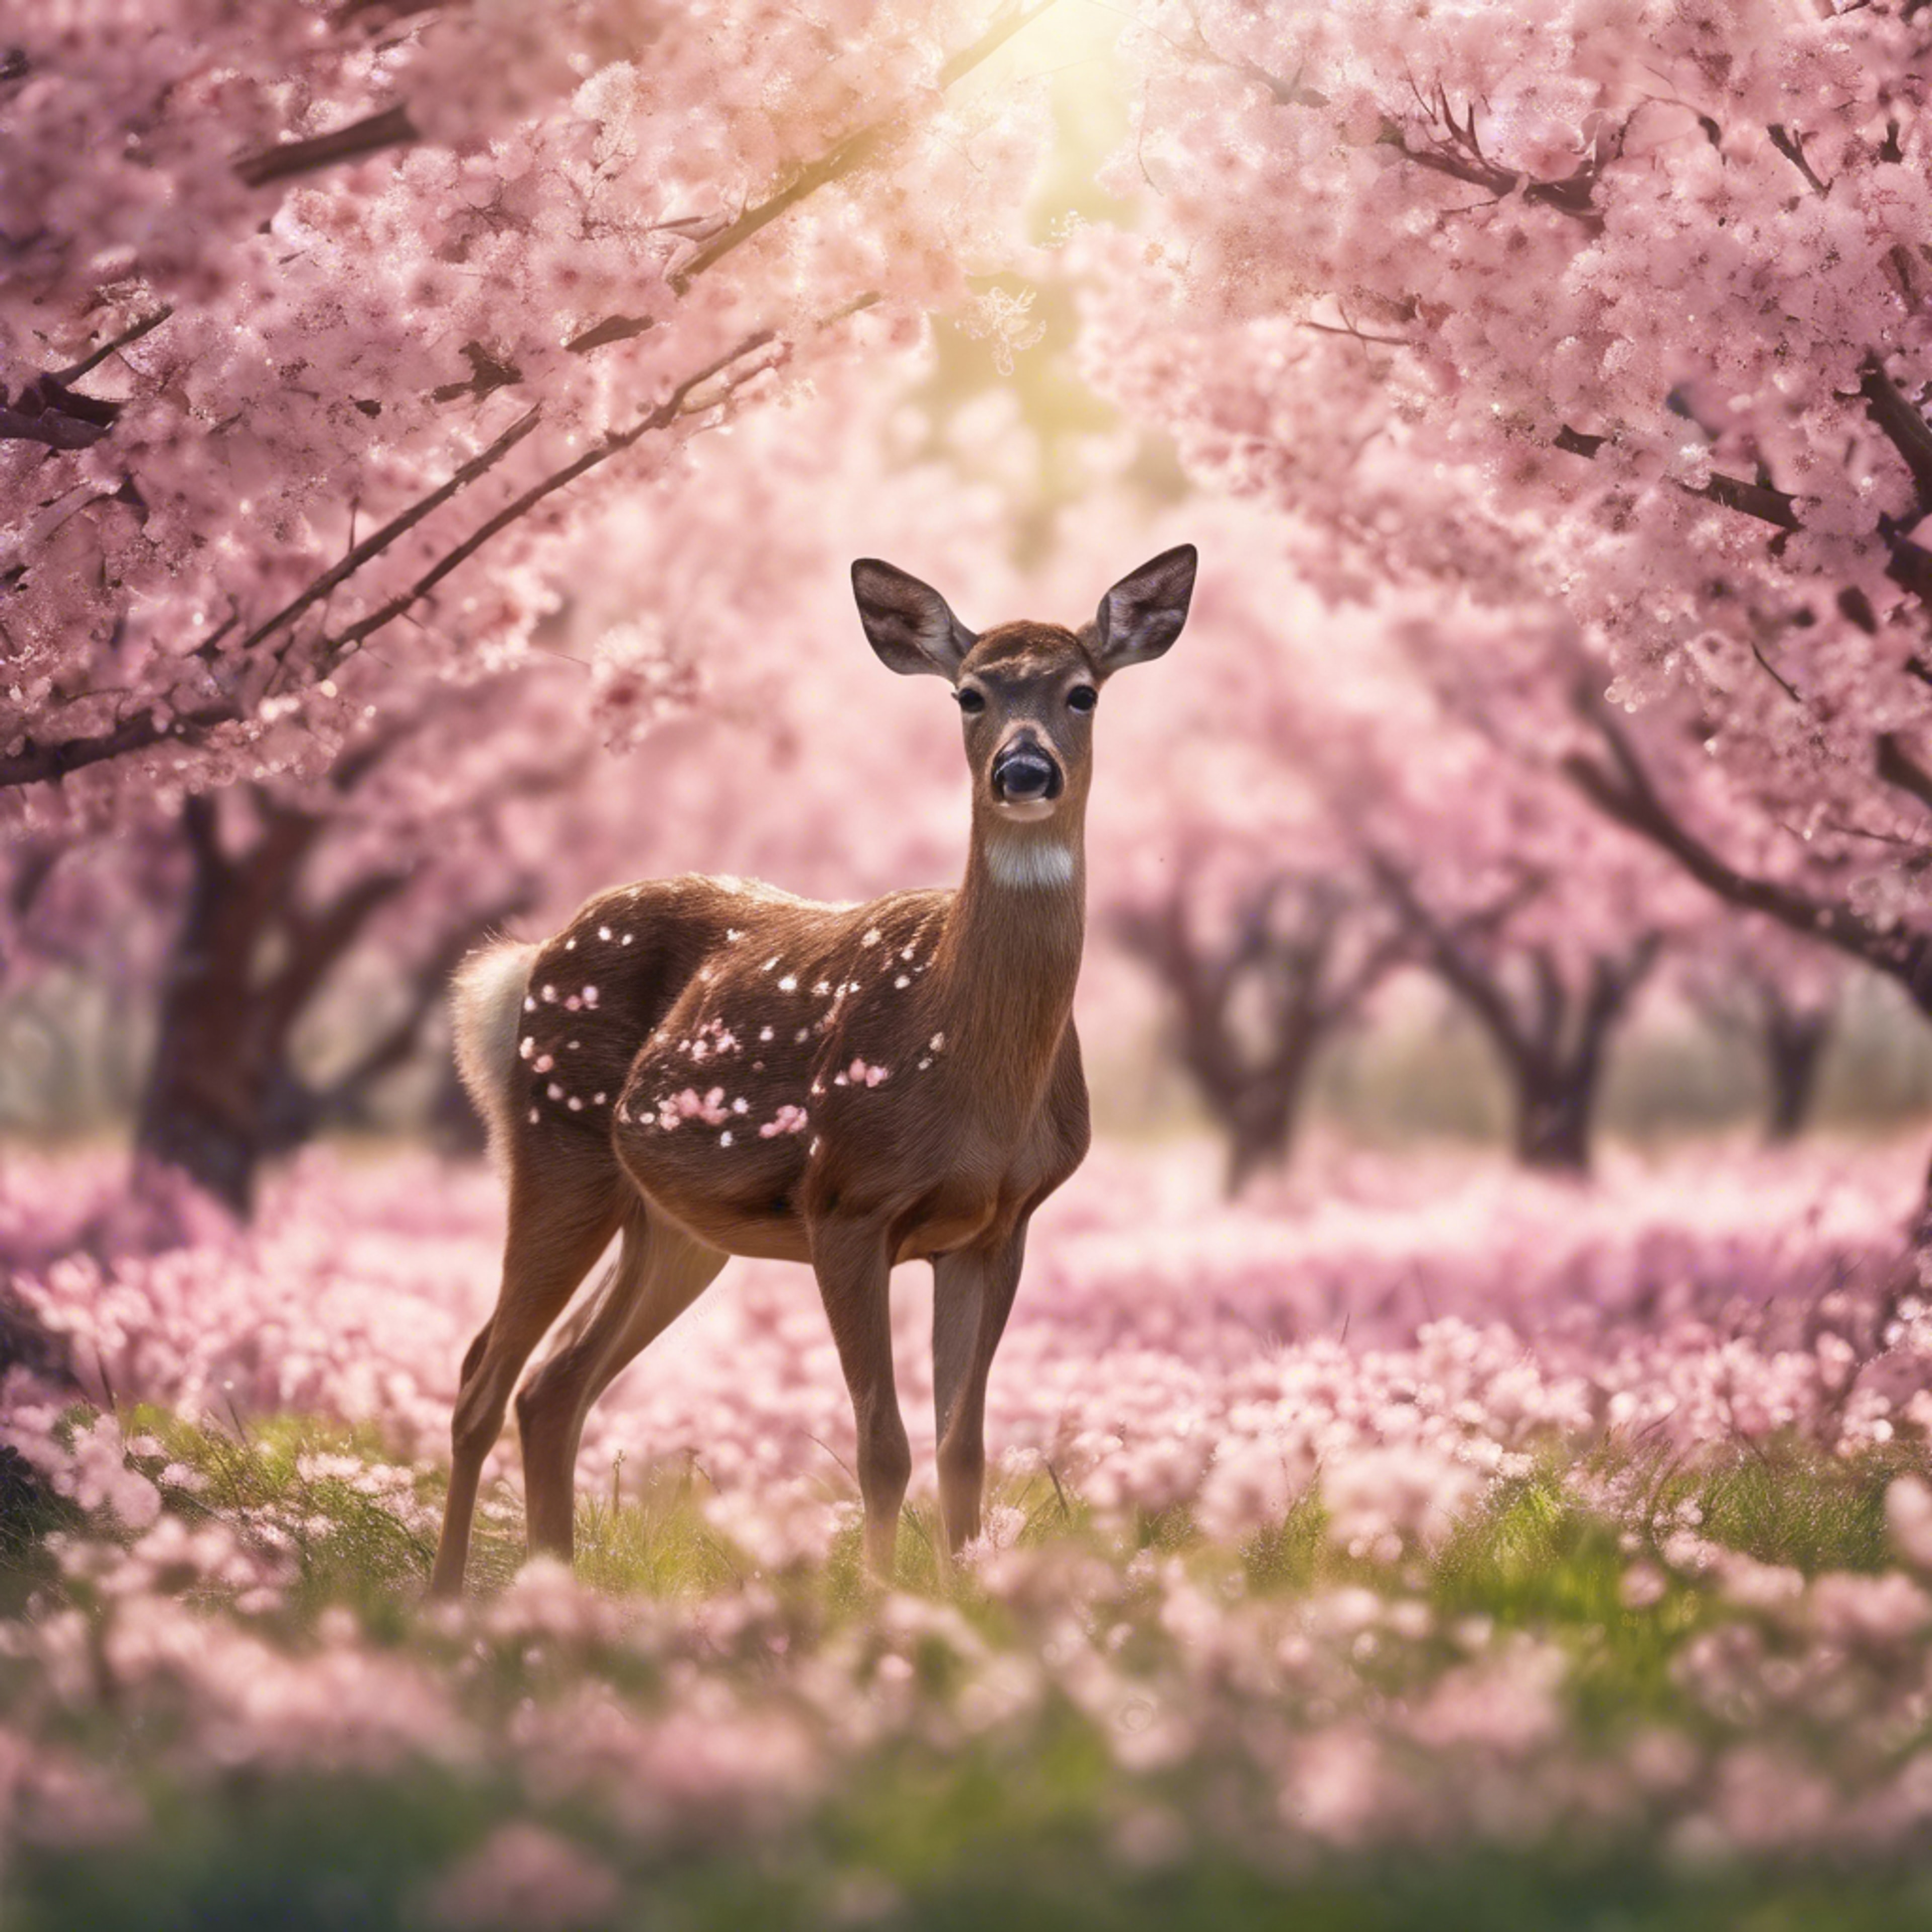 An illustration of a young deer grazing in a field of blooming cherry trees. 墙纸[a2b025554c3c4b6aabc3]